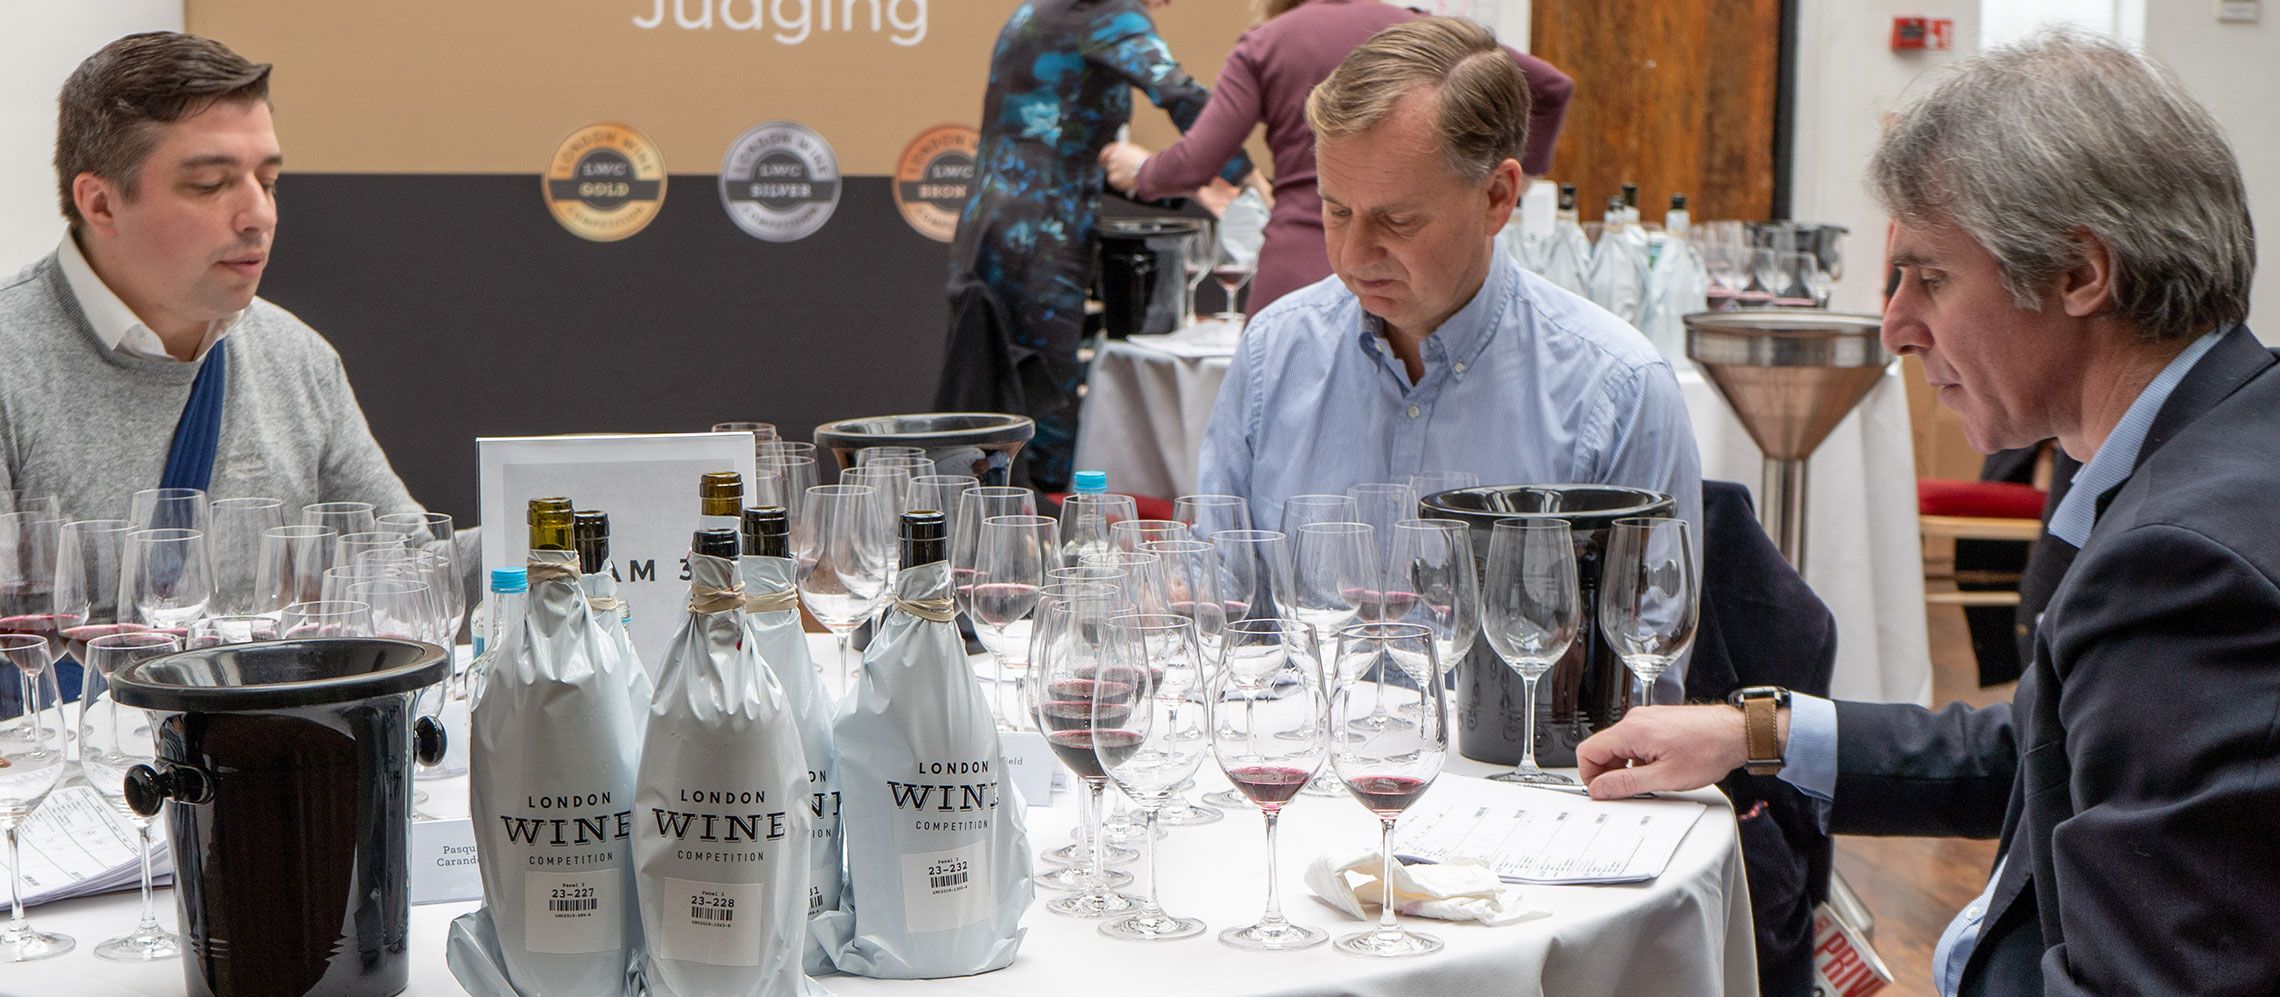 Photo for: Why London Wine Competition Is Now So Important To Both Those Who Make And Sell Wine